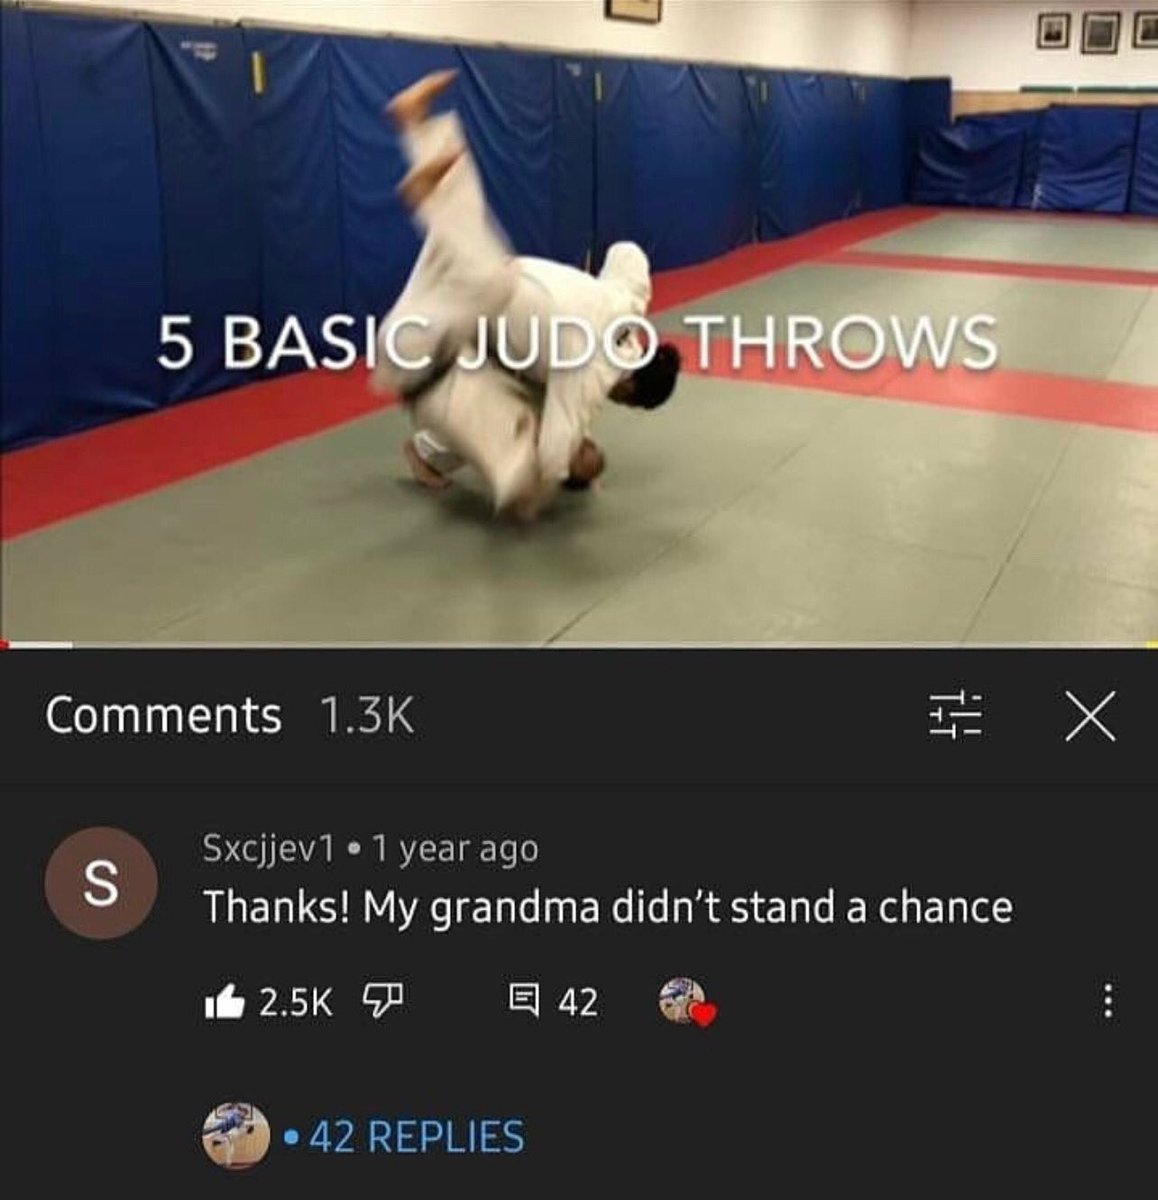 insane youtube comments - indoor games and sports - 5 Basic Judo Throws S # X Sxcjjev1 1 year ago Thanks! My grandma didn't stand a chance. 42 42 Replies